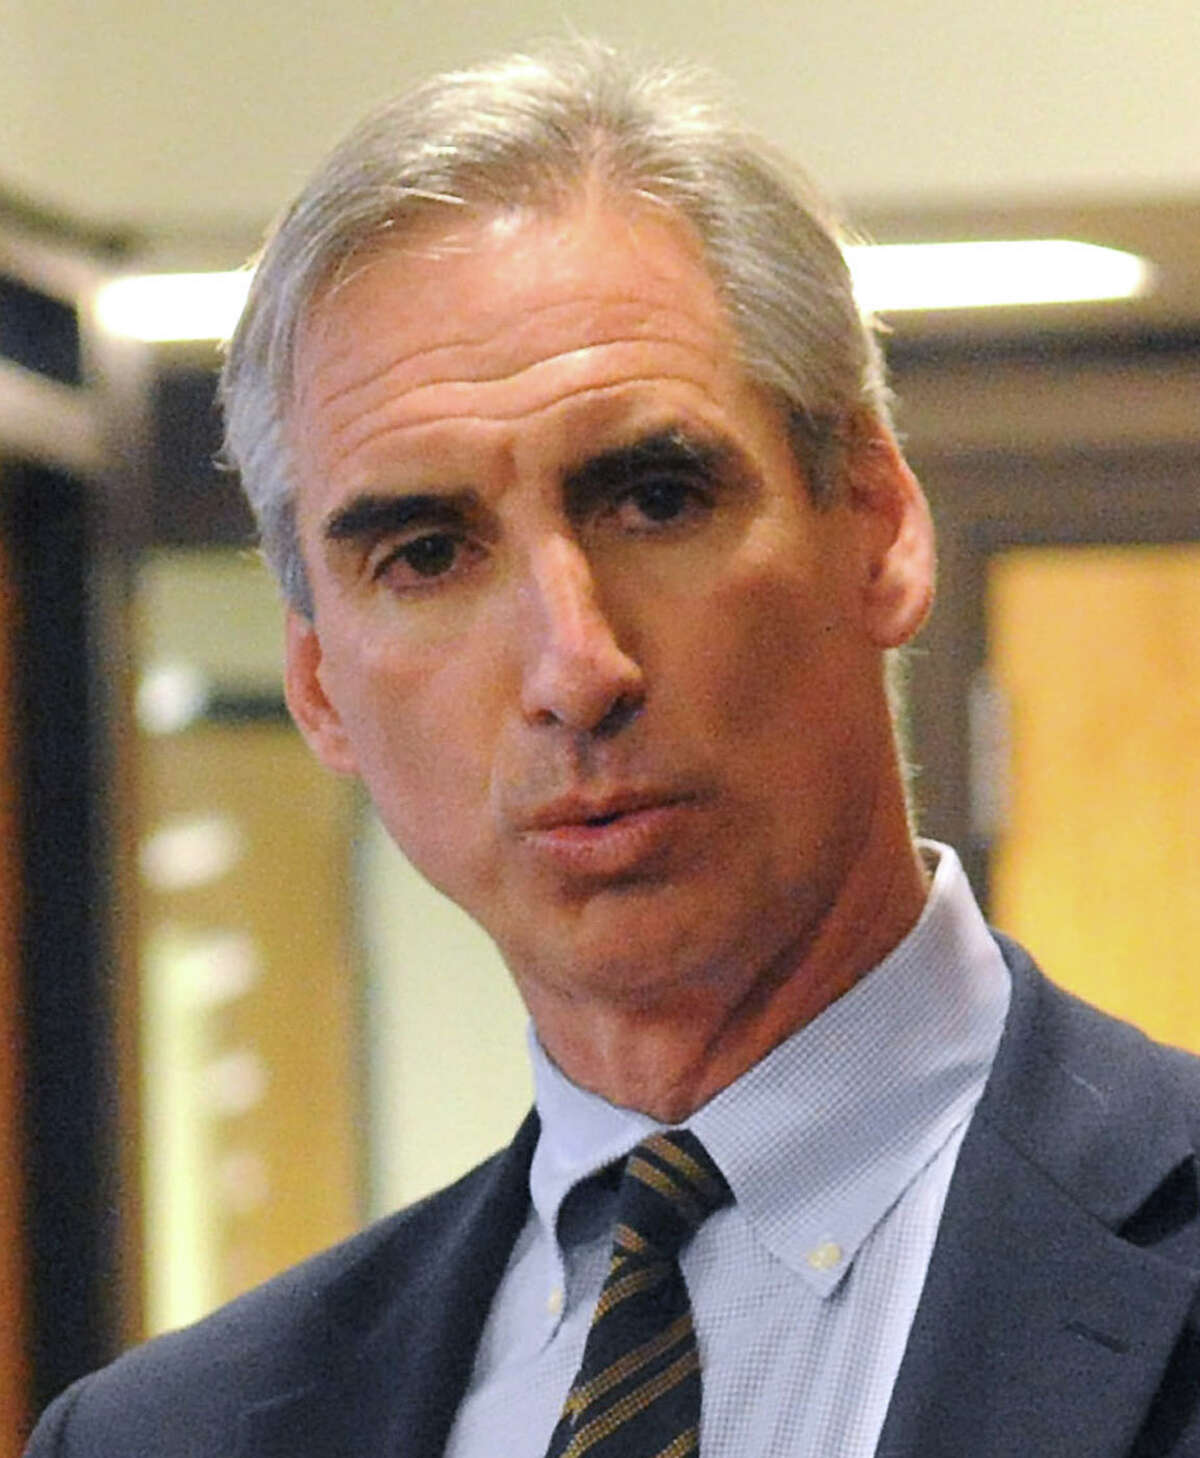 Oliver Luck: West Virginia AD — The former NFL quarterback has extensive sports marketing background, getting stadiums built in Houston, running the Houston Dynamo and even the Frankfurt Galaxy in the World League of American Football. Younger UT alums like how he got beer into Mountaineer Stadium and has been a forceful national ally for that movement. And he's Andrew Luck's dad. Odds: 3-1